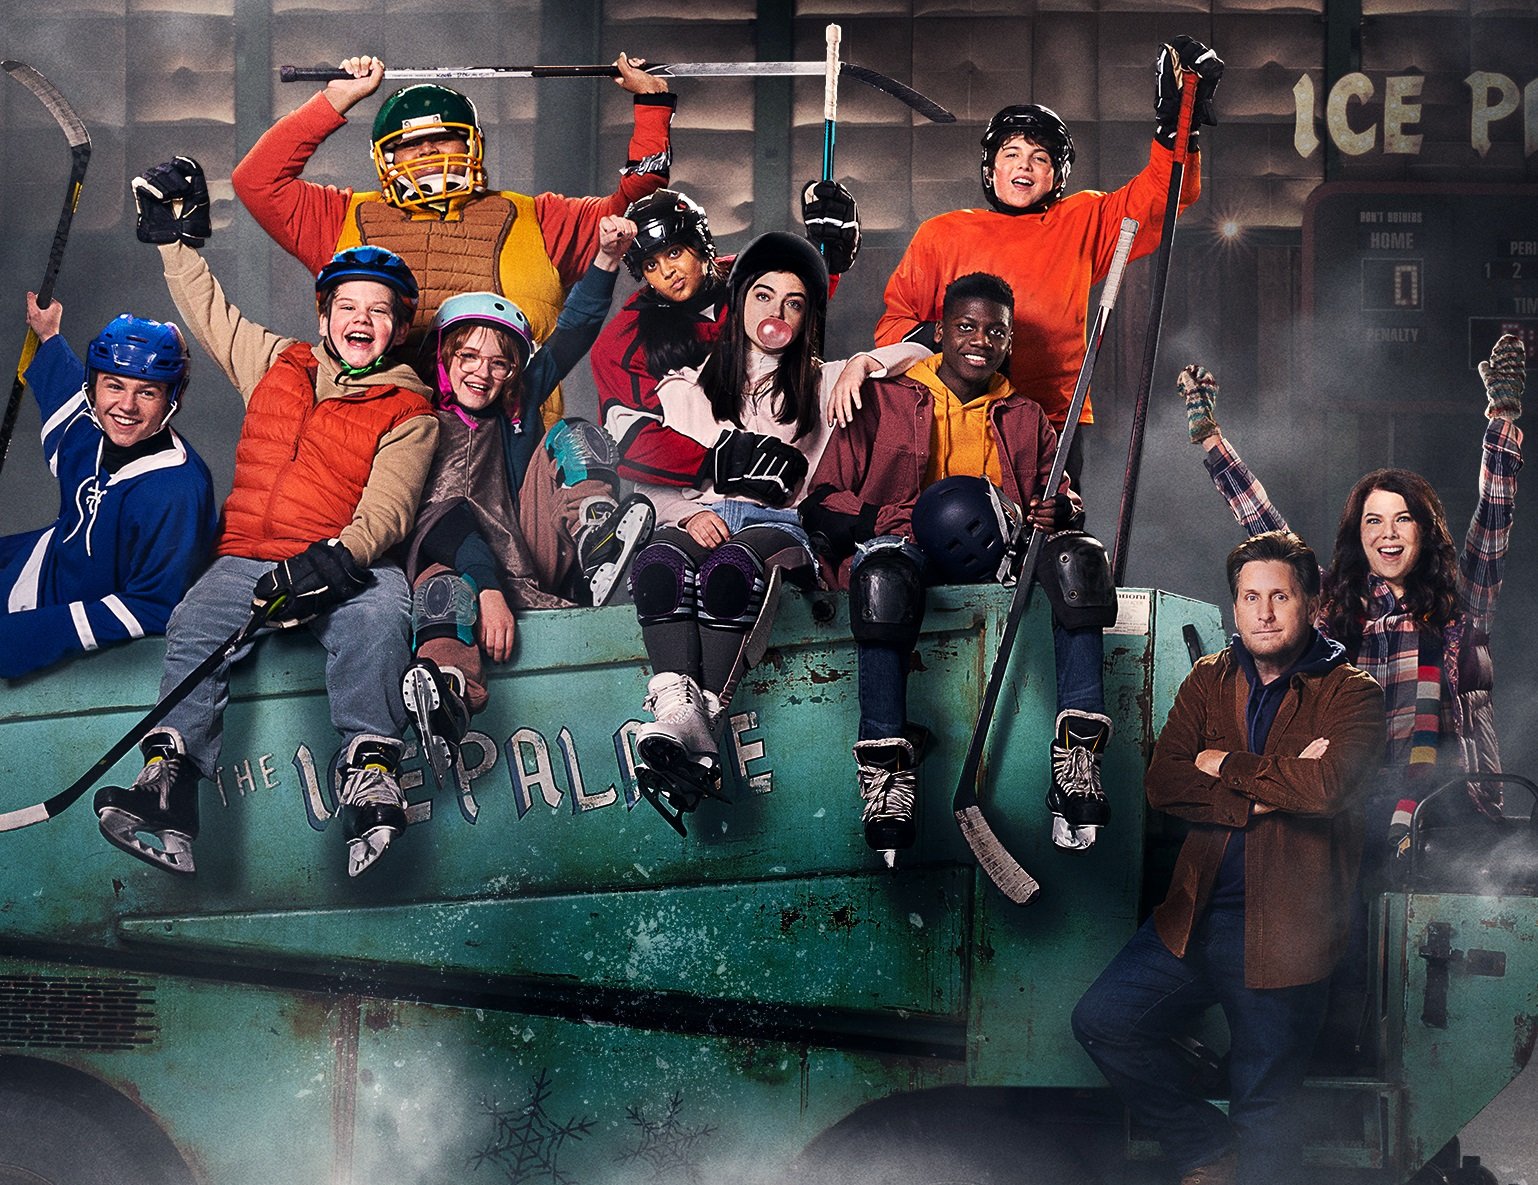 Mighty Ducks Game Changers cast photo